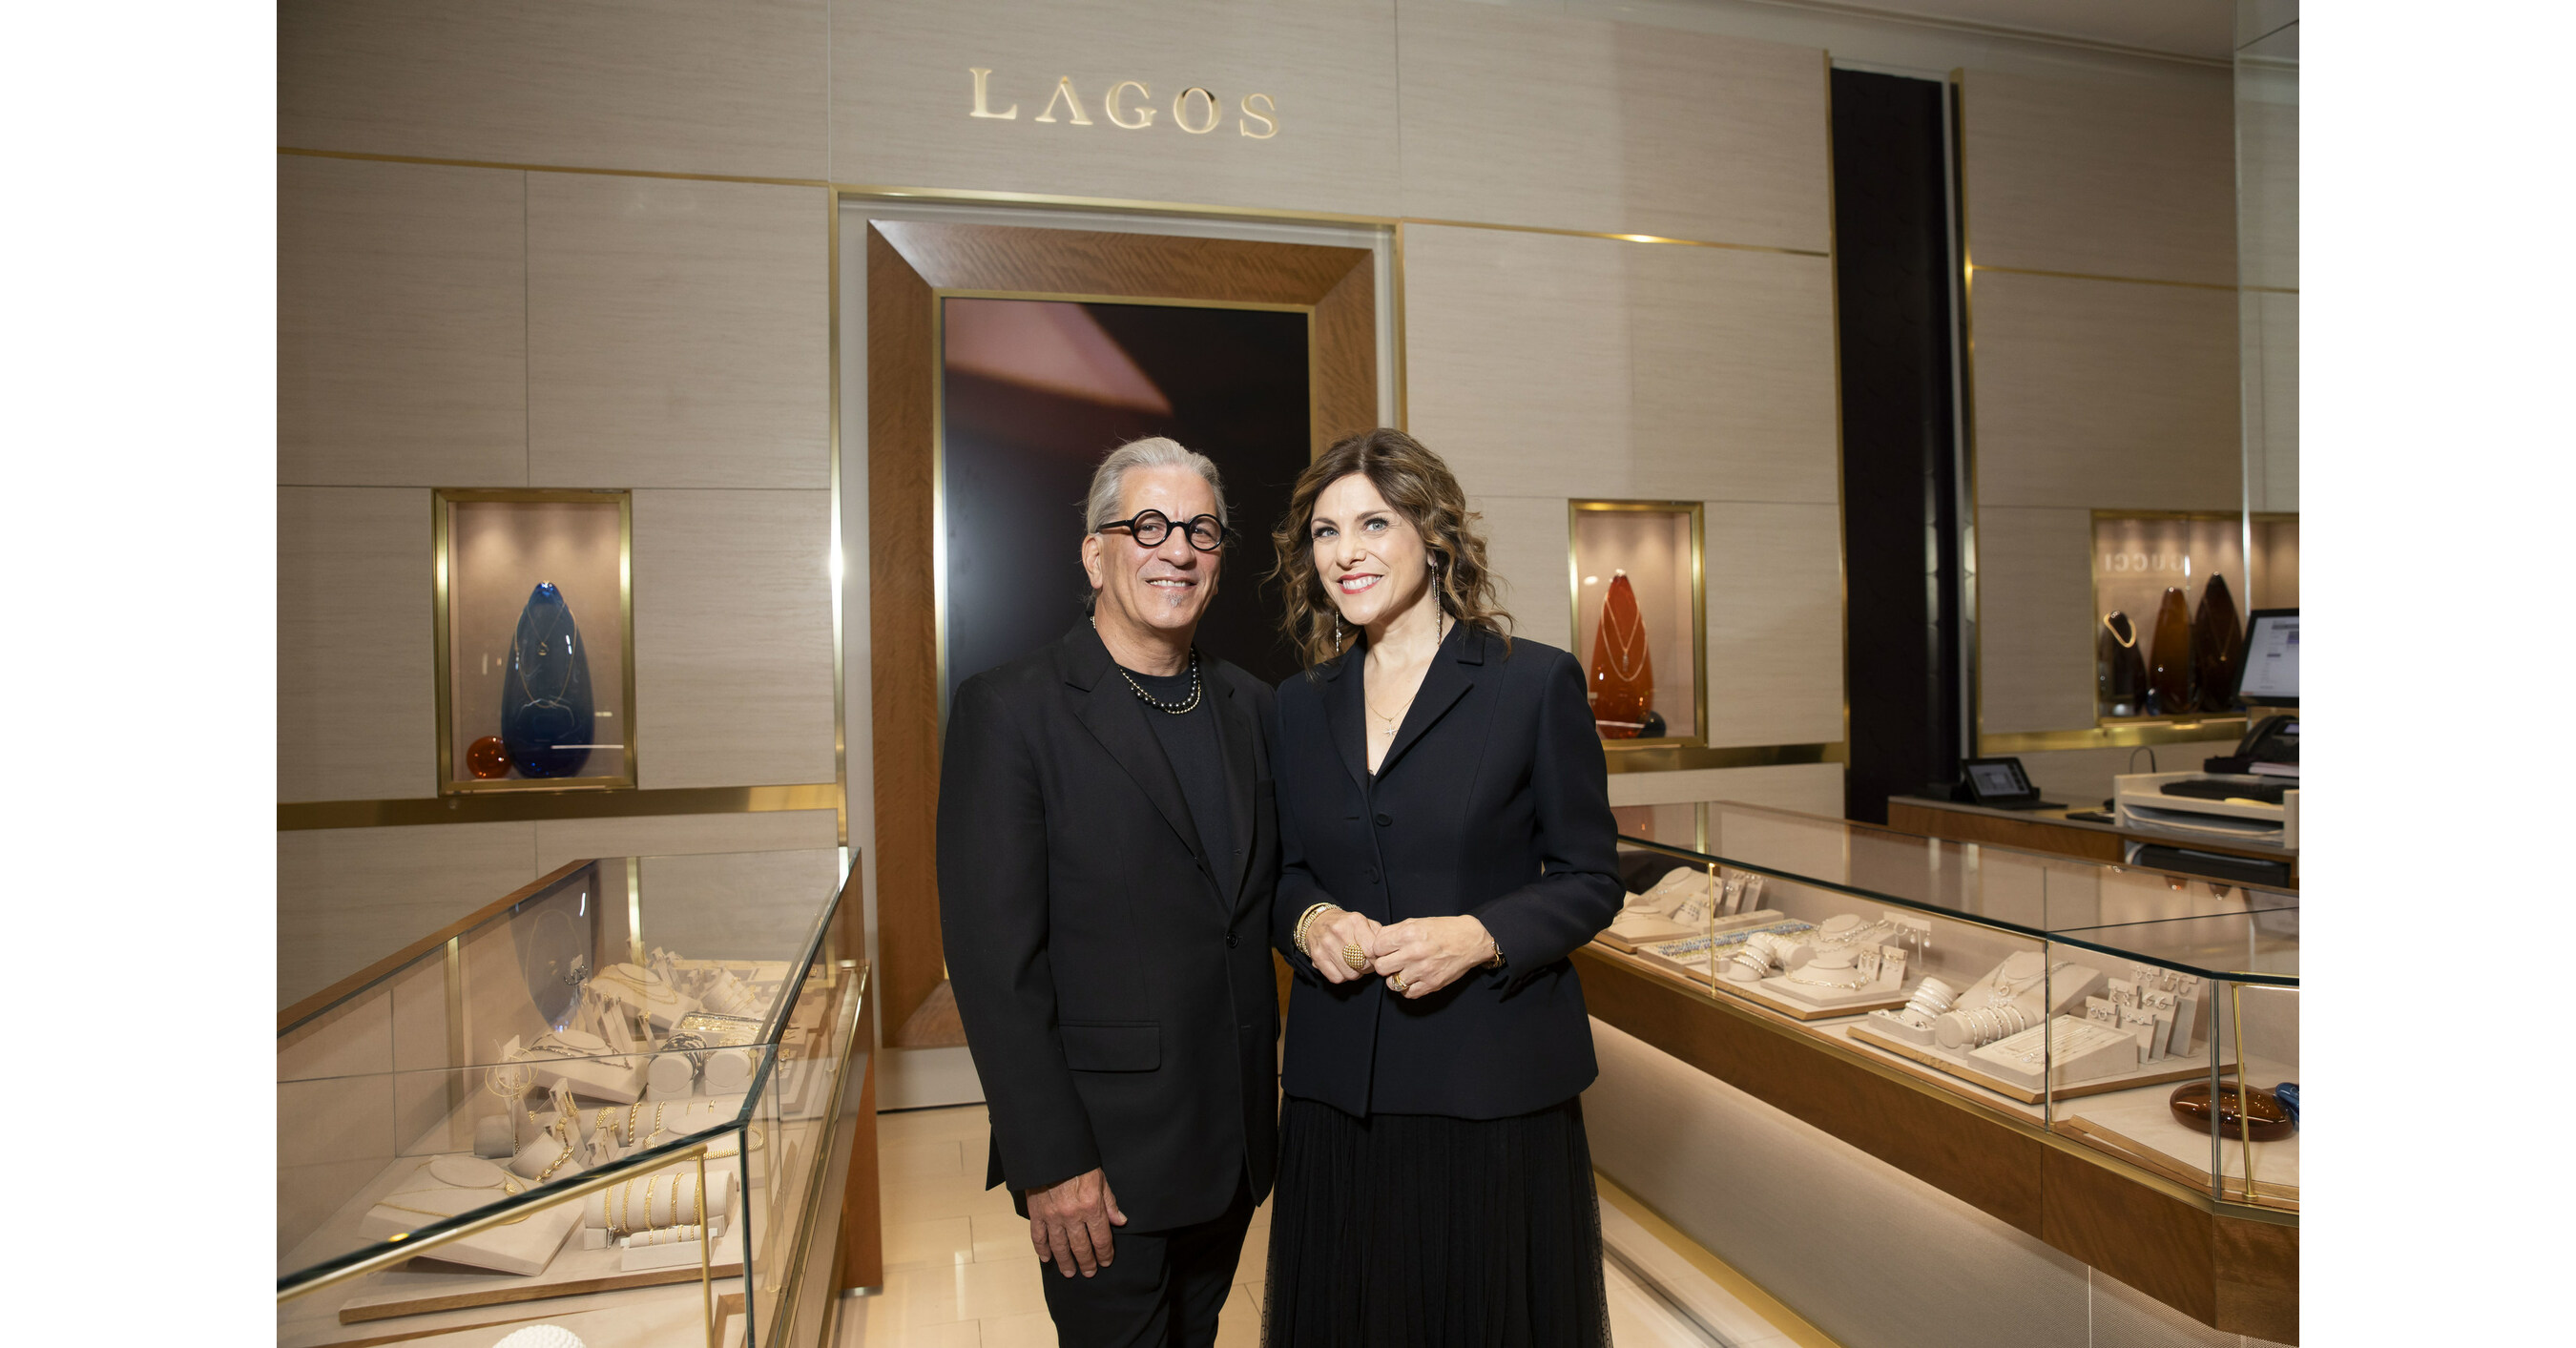 De Beers Group and Couture celebrate diversity in fine jewelry at New York  event